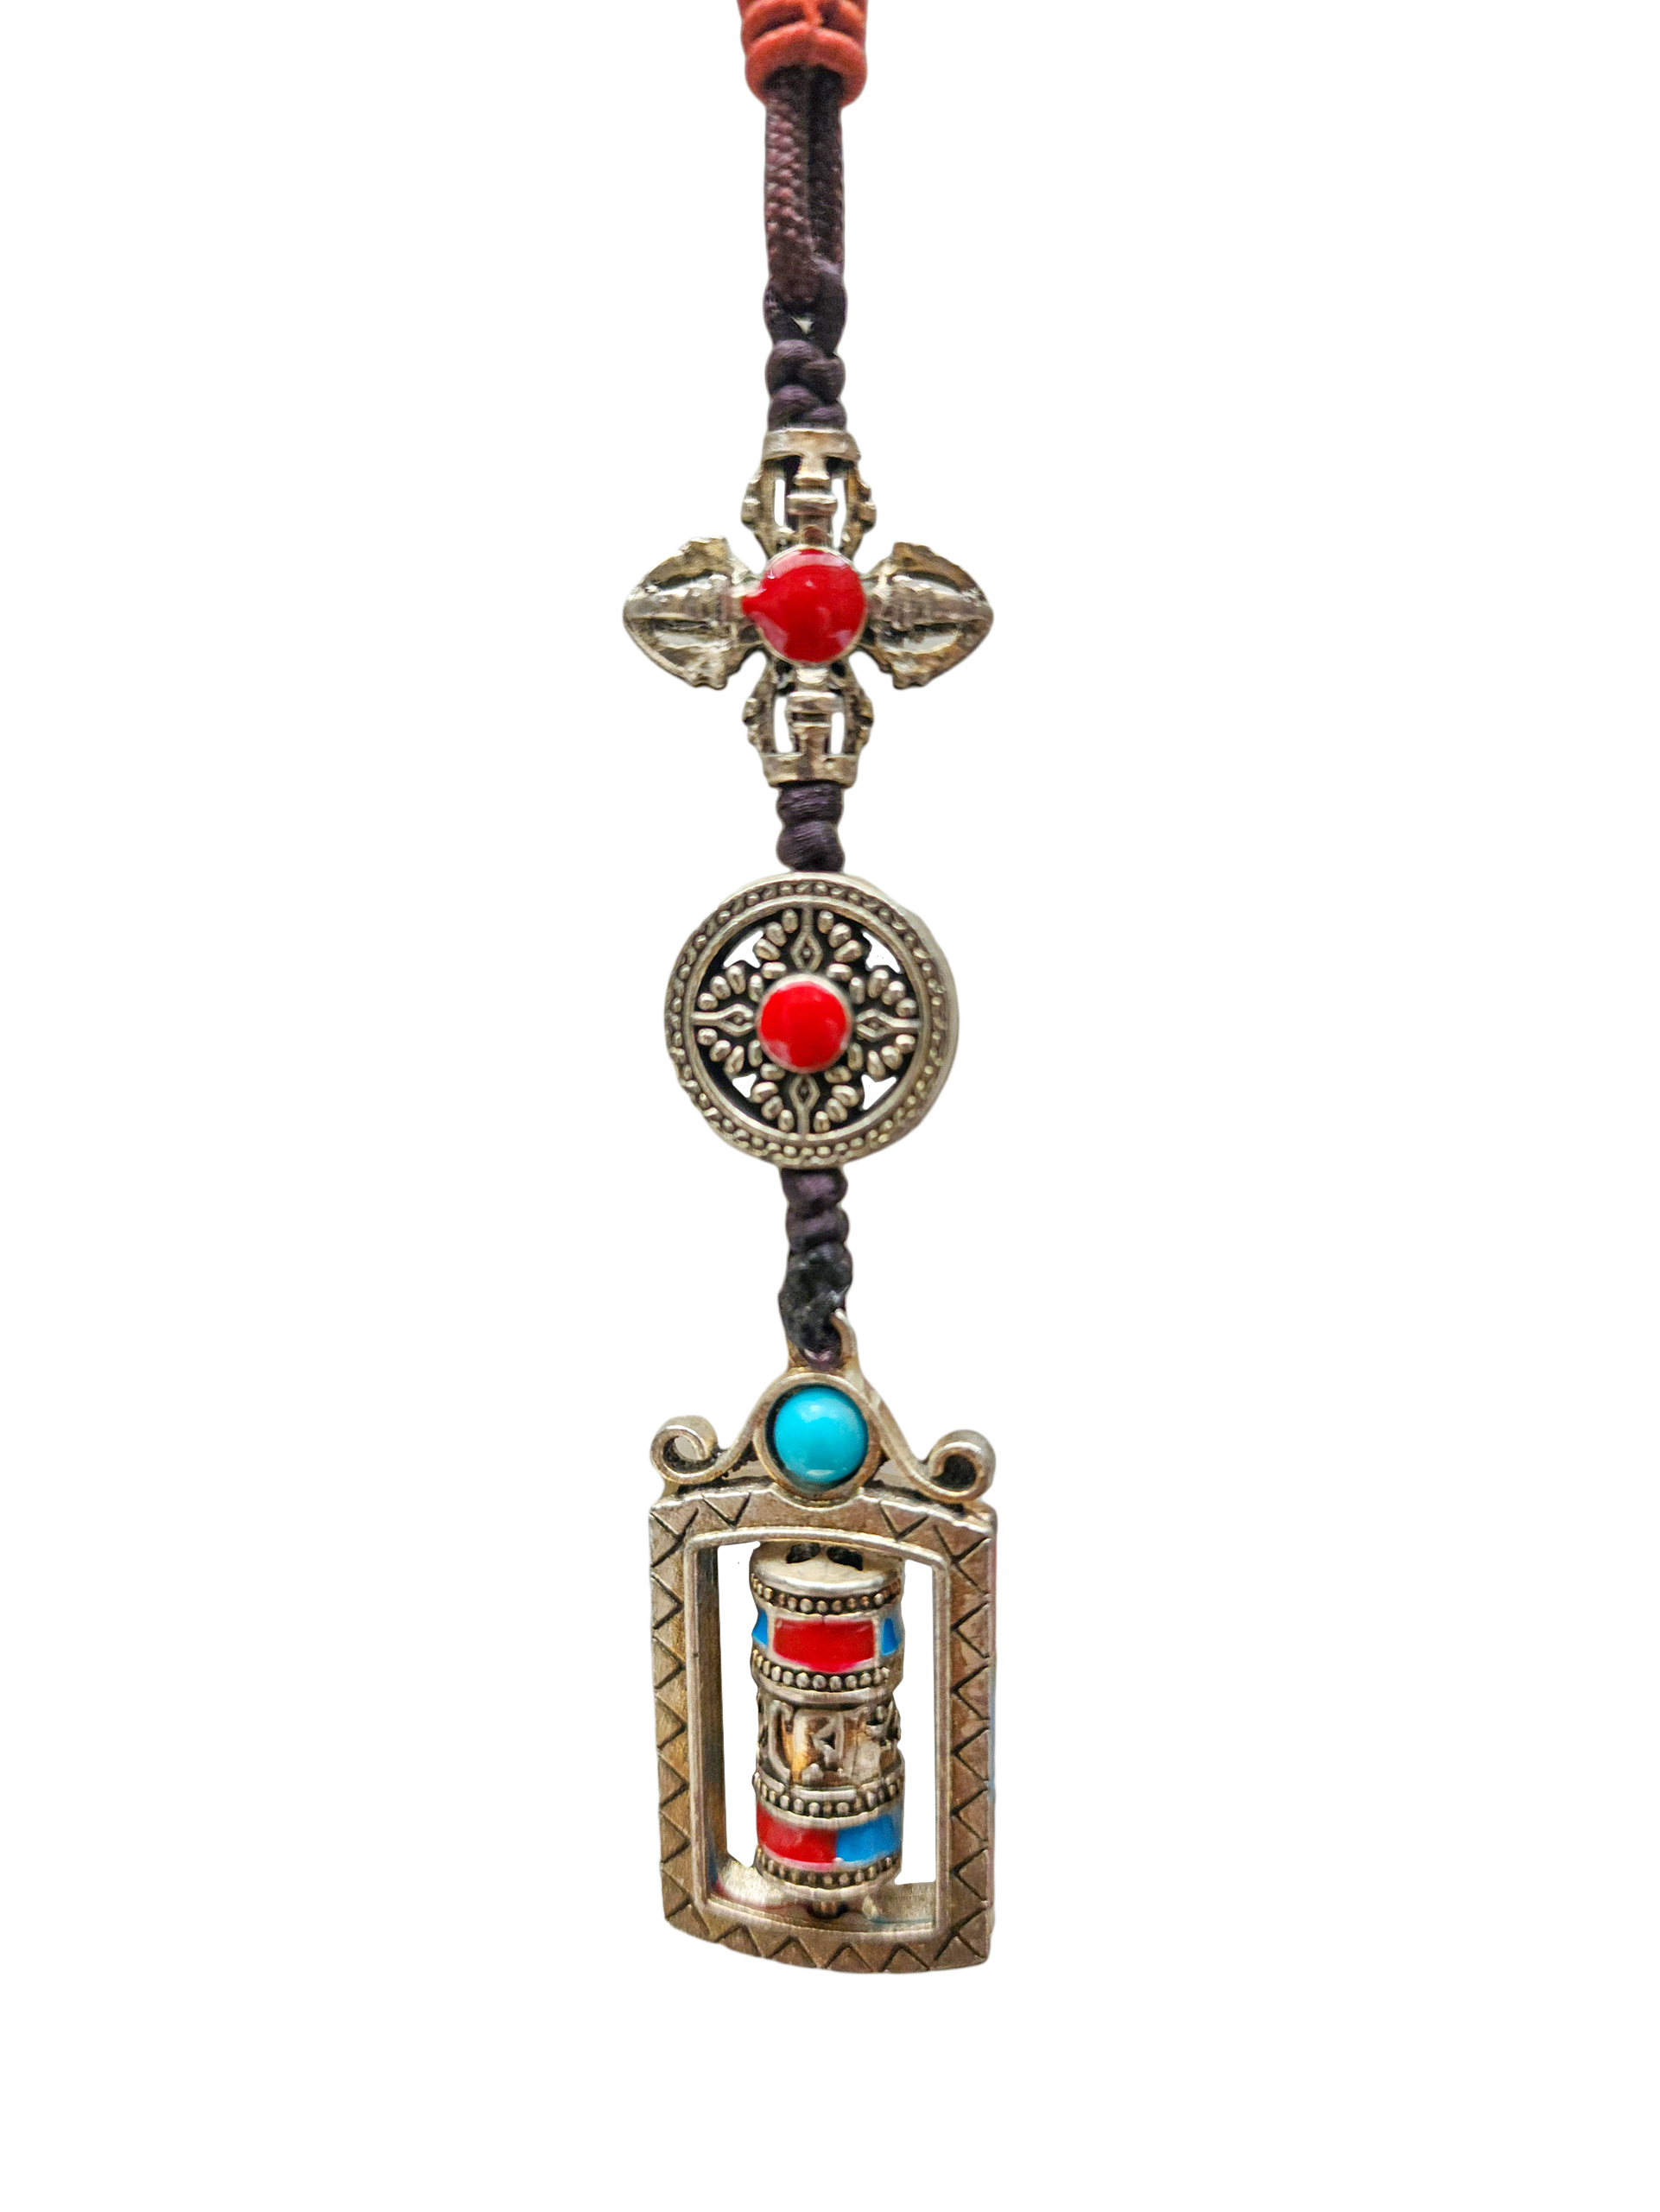 Buddhist Ritual Amulet Hanging With Double Dorje And Prayer Wheel, For Wall, Altar, Bags And Keyring